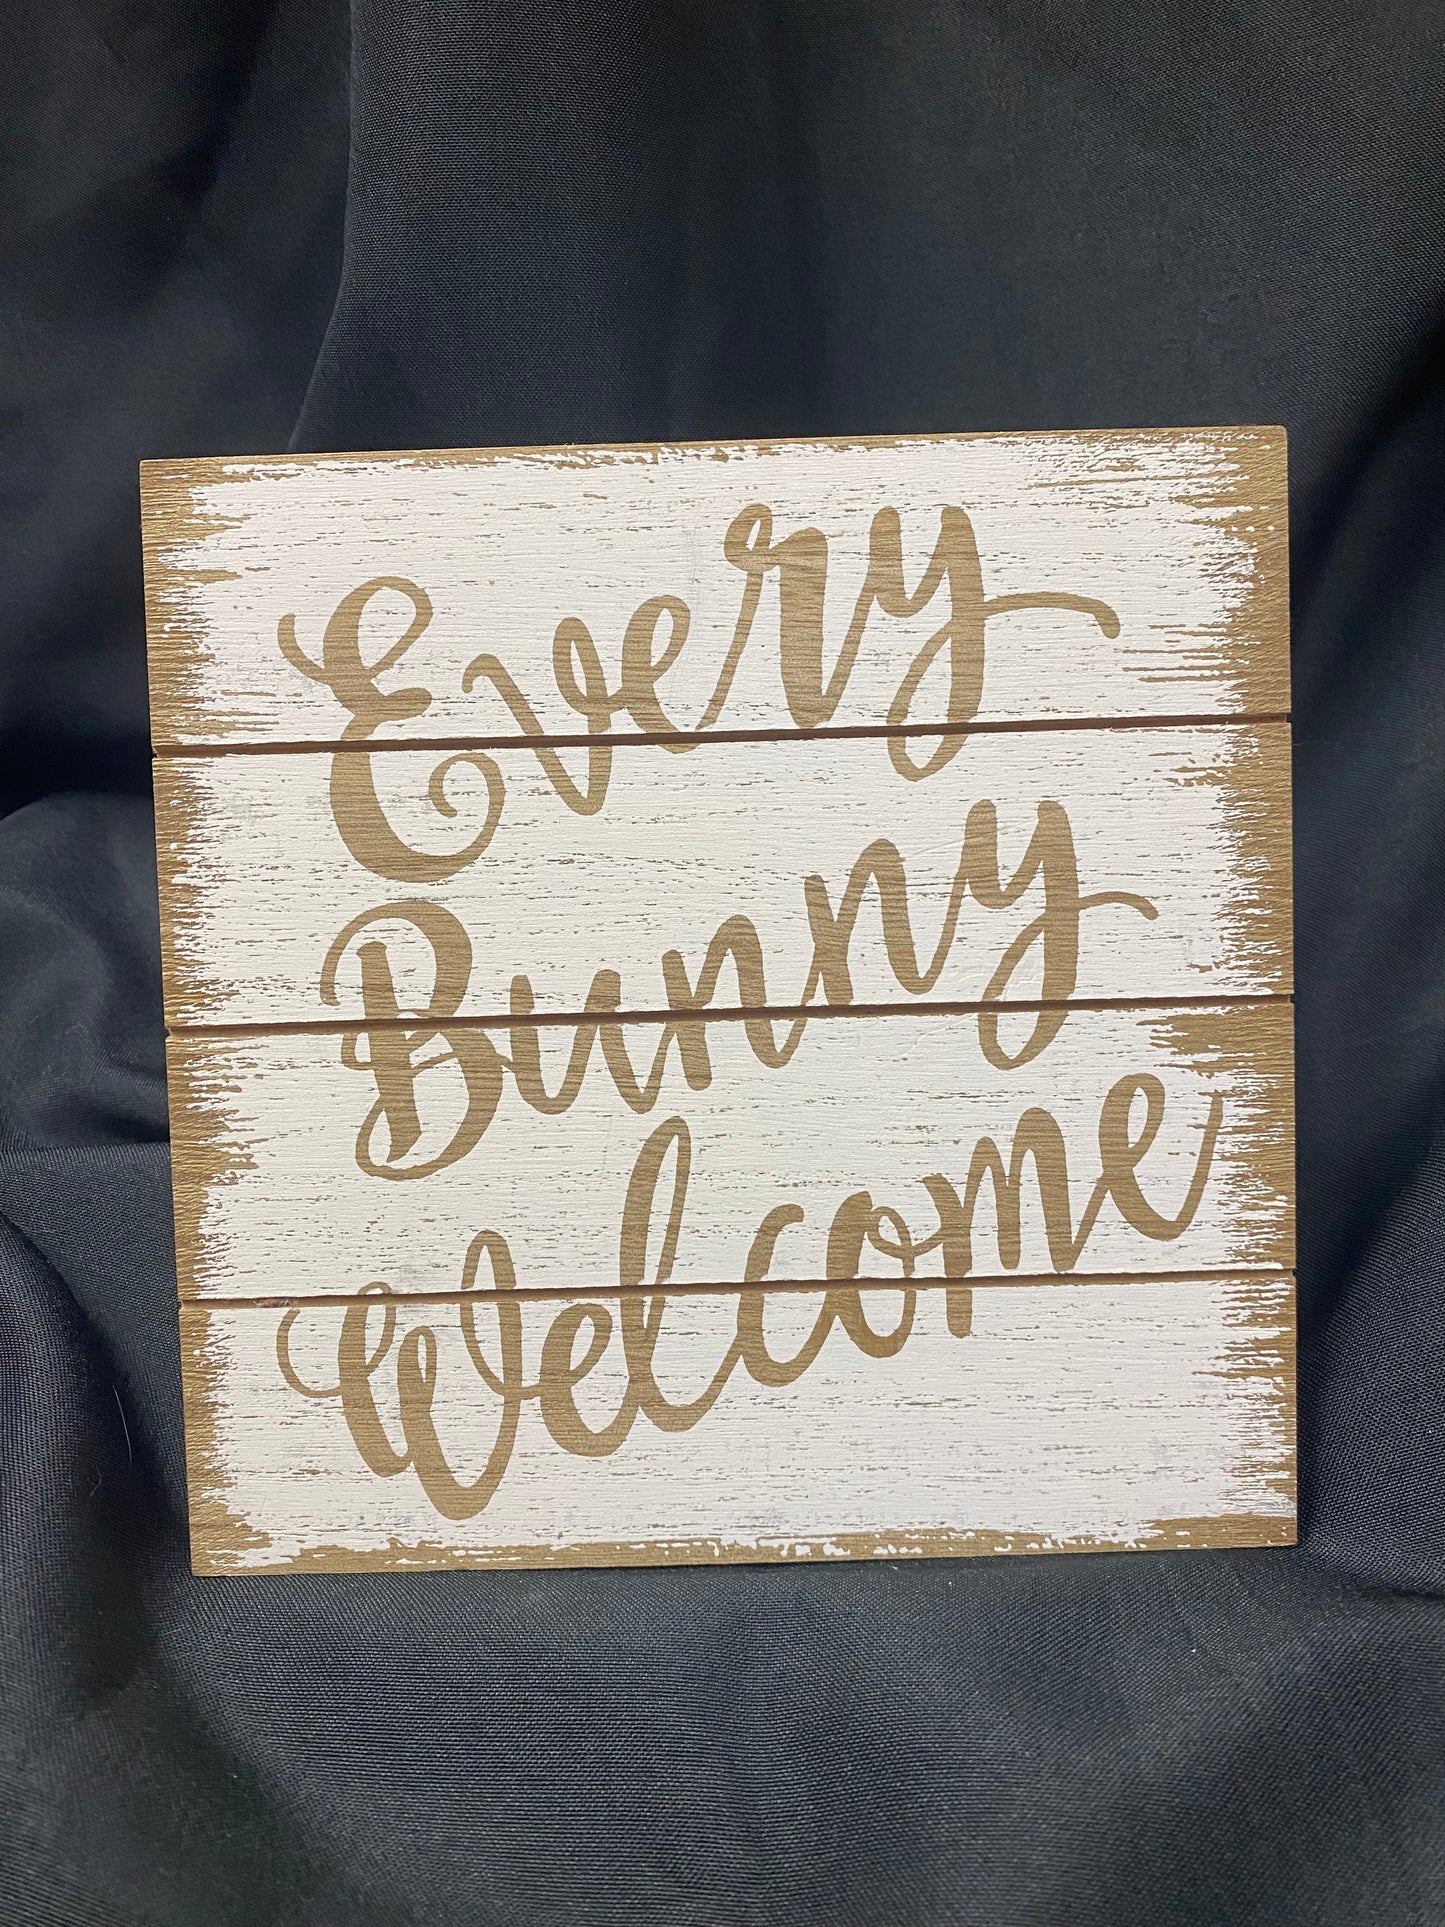 Every Bunny Welcome Sign